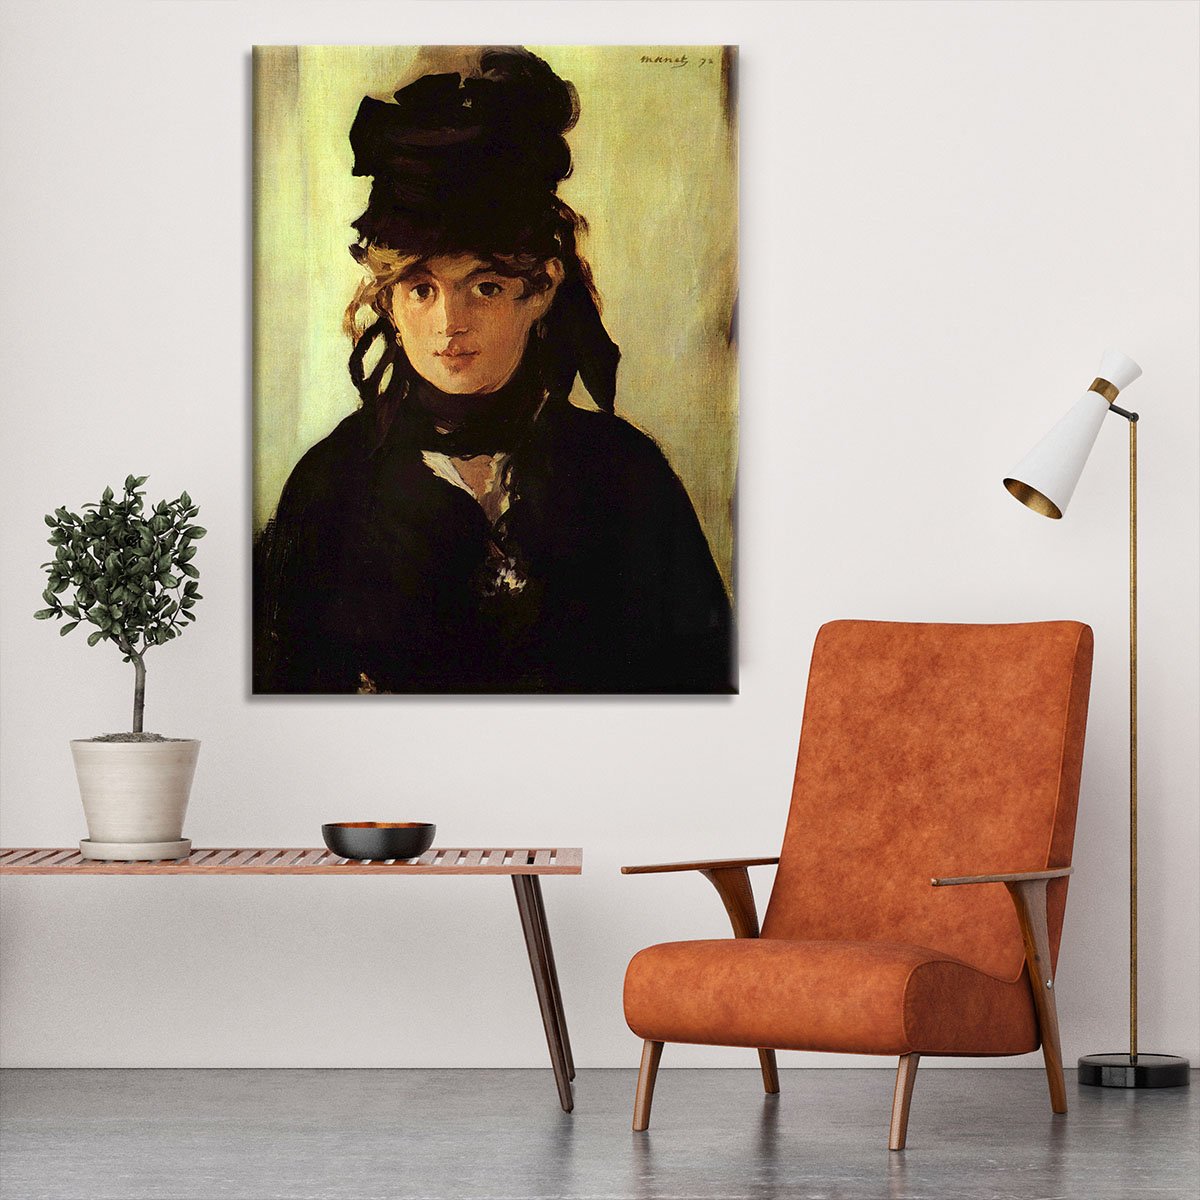 Berthe Morisot by Manet Canvas Print or Poster